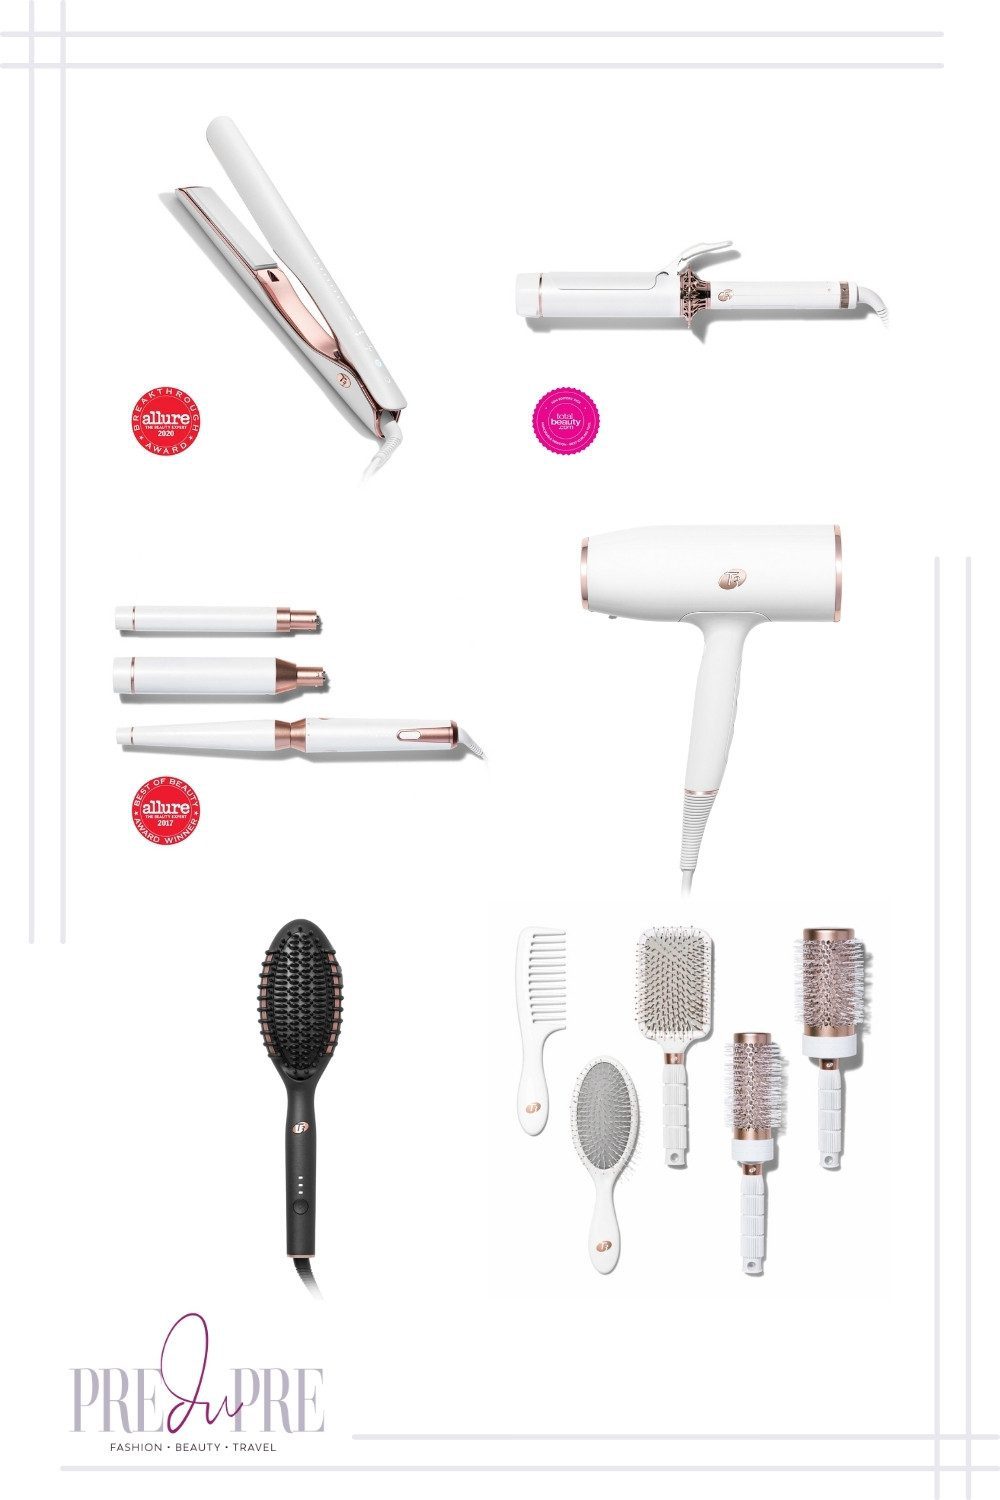 T3 hair tools:  curling iron, hair dryer, and flat iron